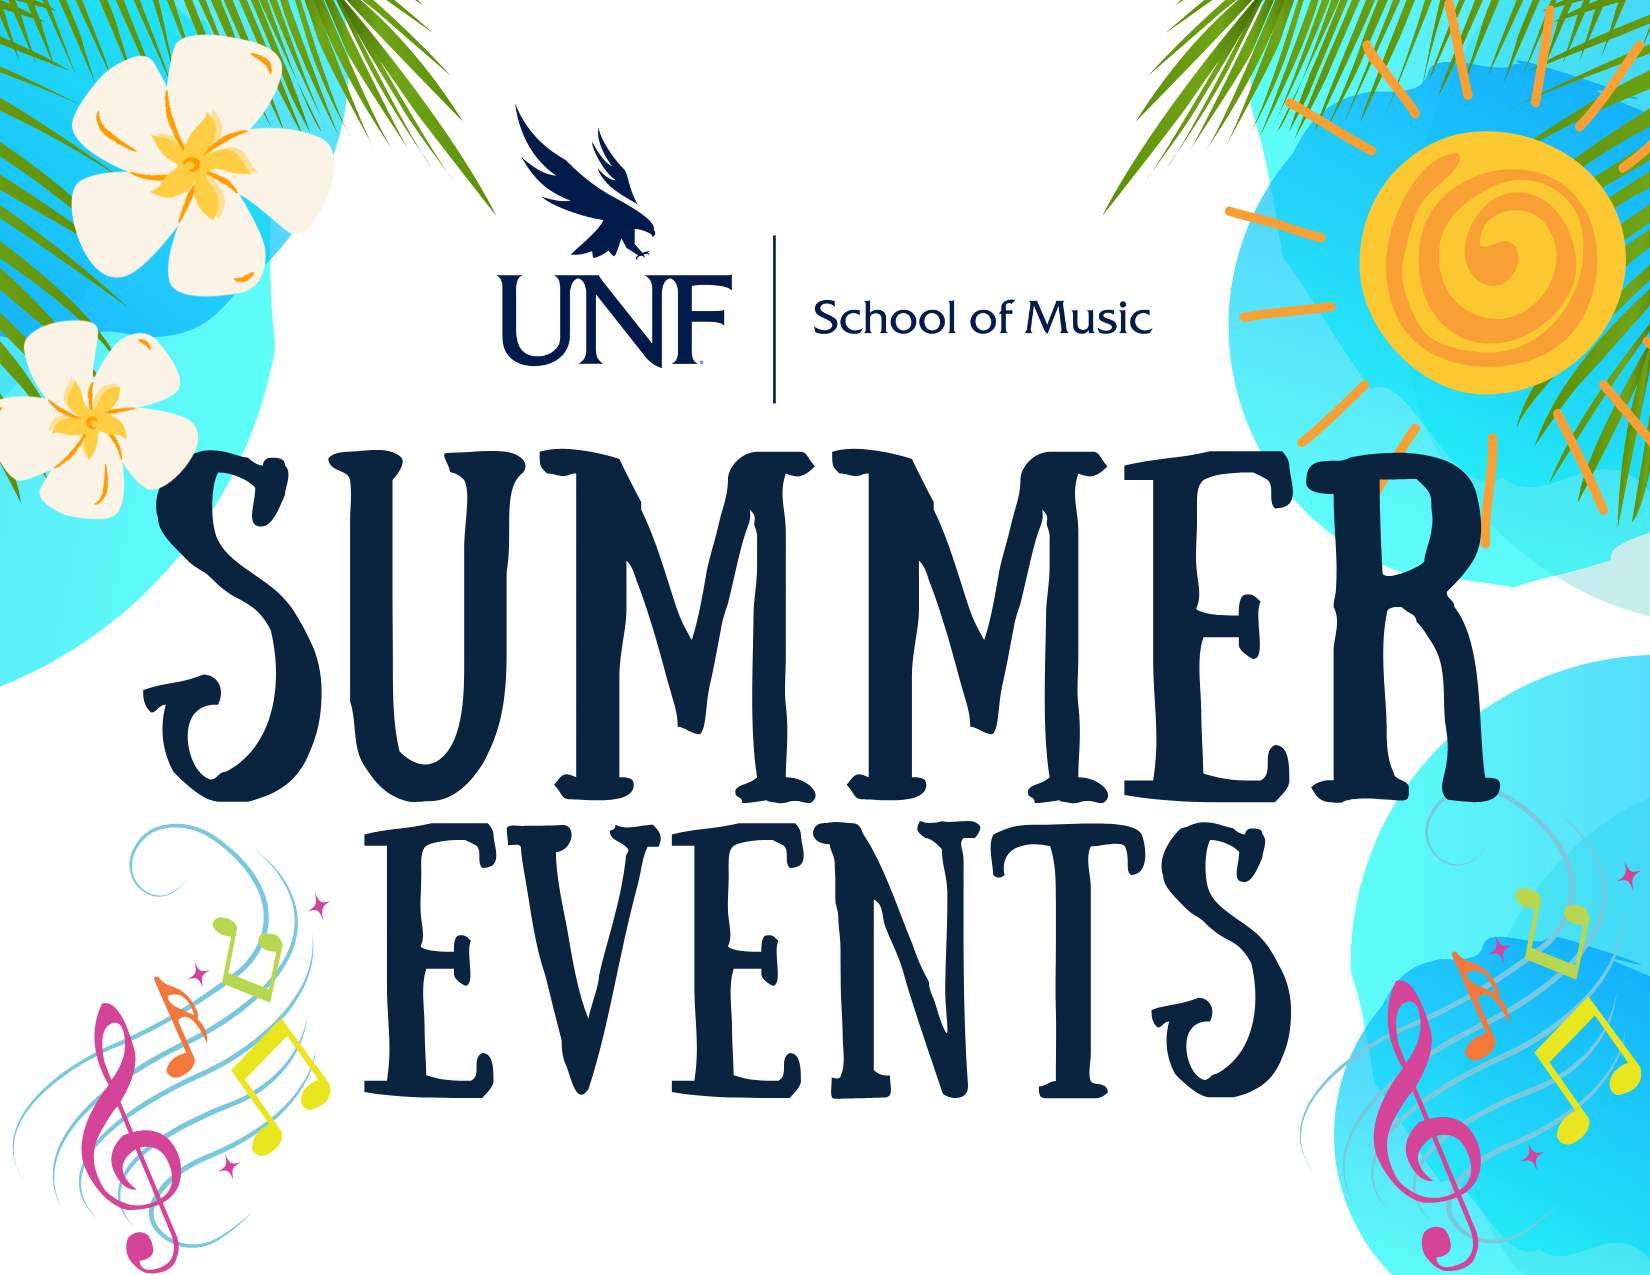 UNF School of Music Summer Events text bordered by palm leaves, blue circles, flowers and music notes.